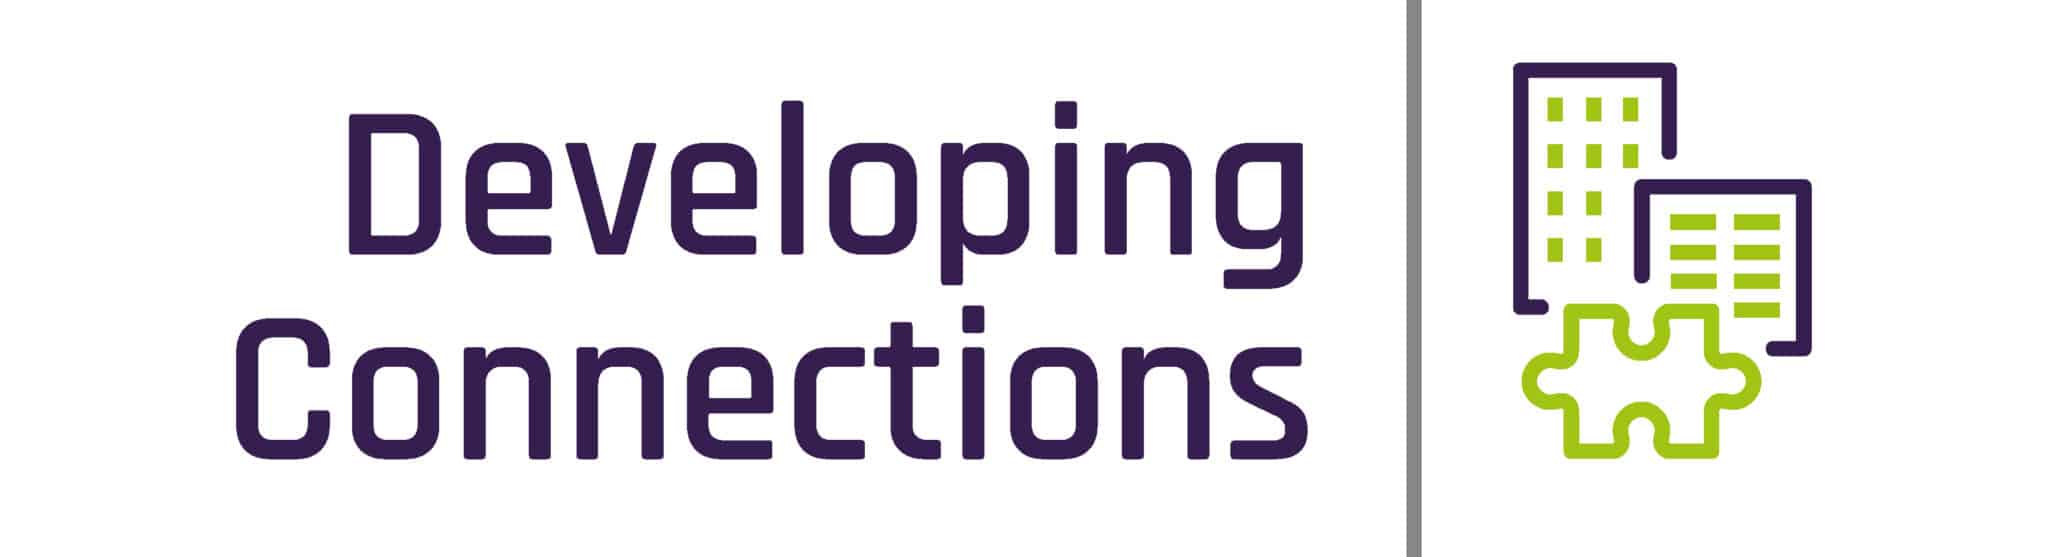 Developing Connections Logo